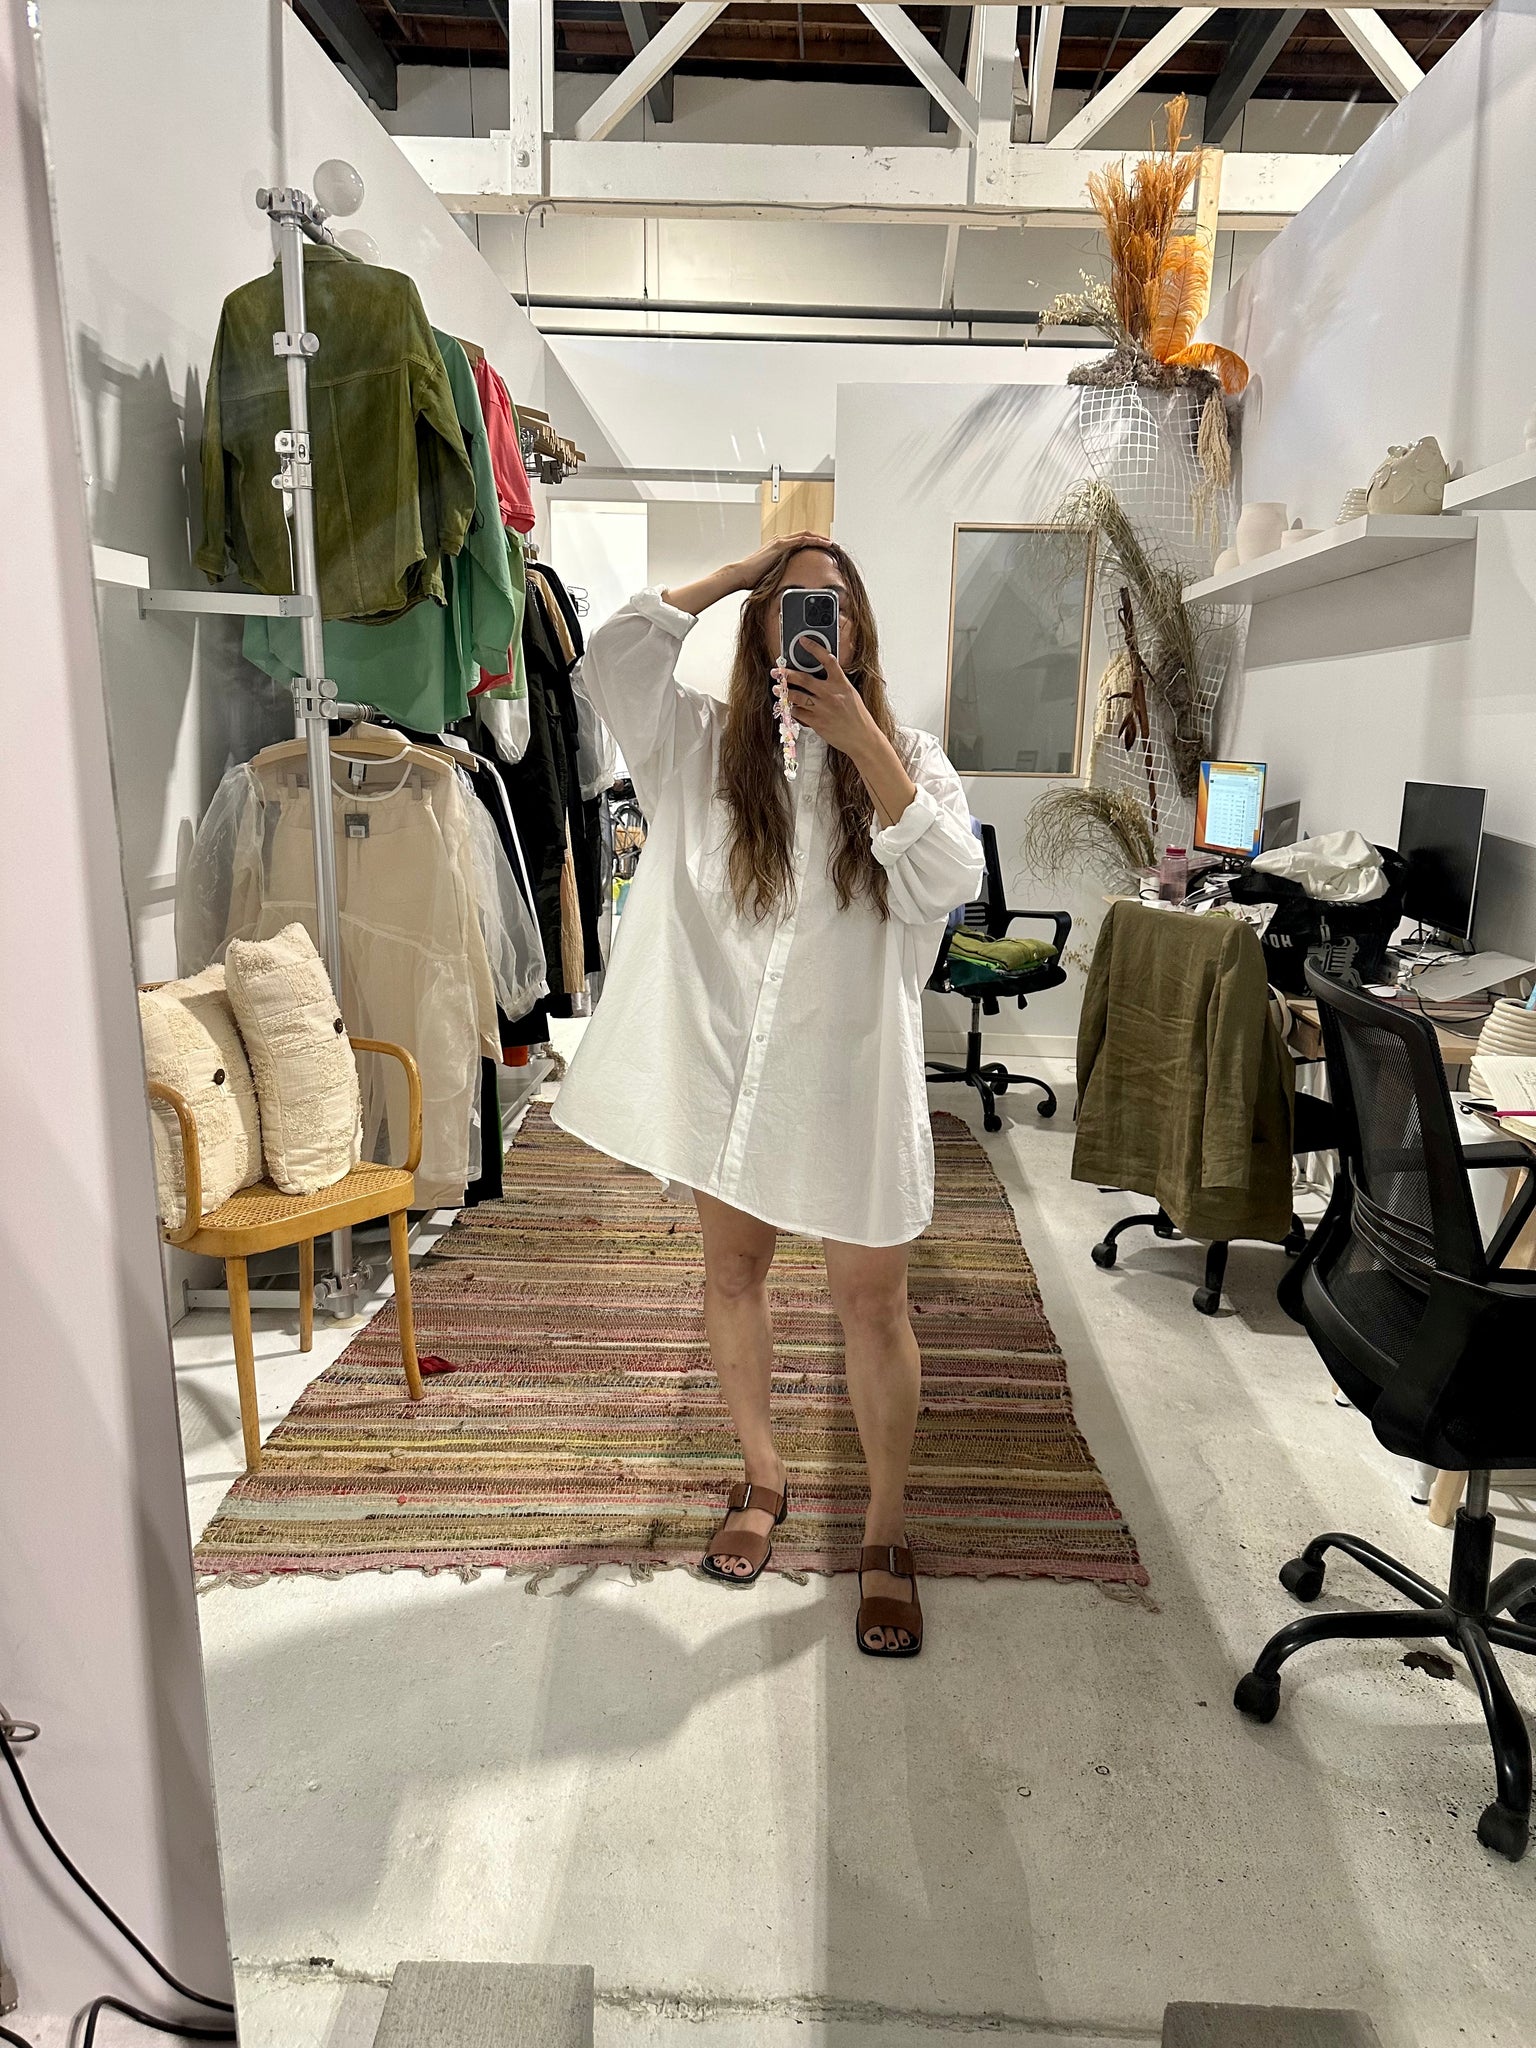 Riley Blouse in White